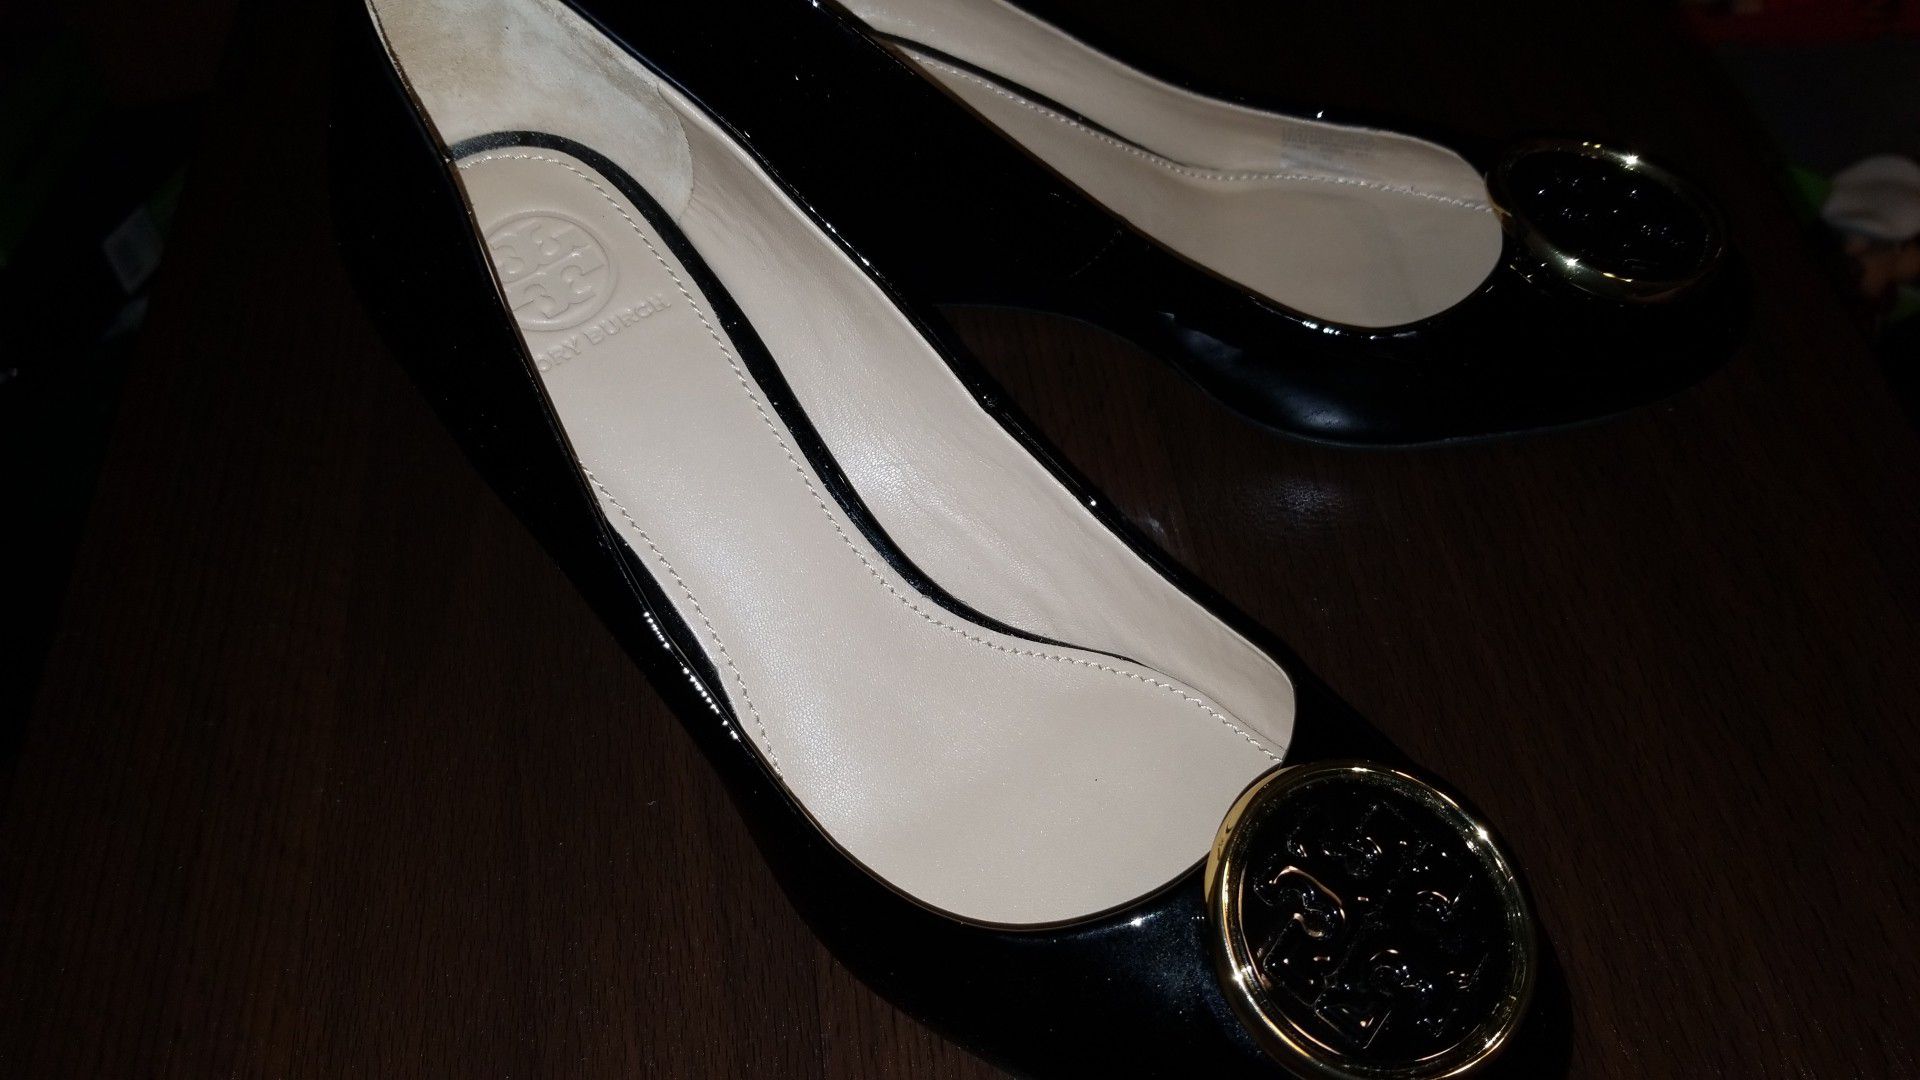 Tory Burch Chelsea Wedge Medallion Pump Size  for Sale in San Antonio,  TX - OfferUp